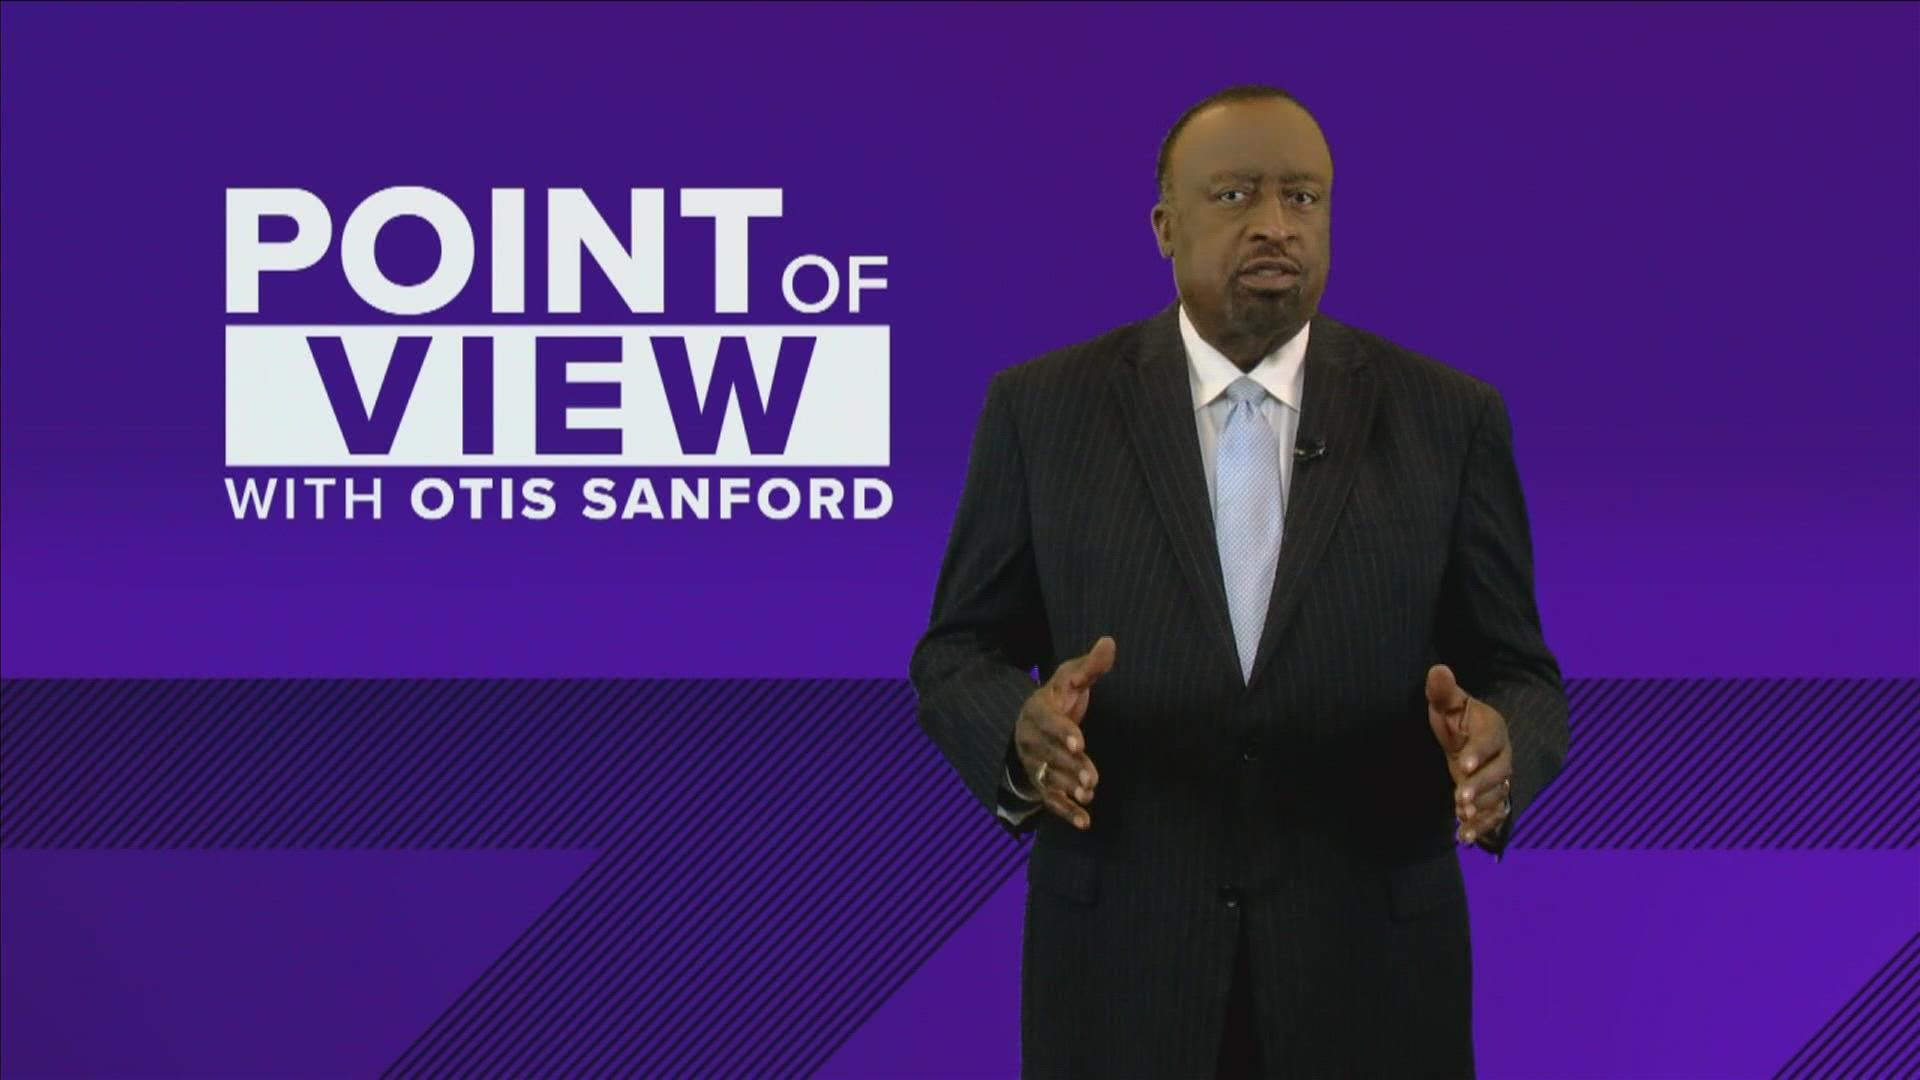 ABC24 political analyst and commentator Otis Sanford shared his point of view on Memphis Mayor Jim Strickland’s contention the 2020 Census undercounted in Memphis.